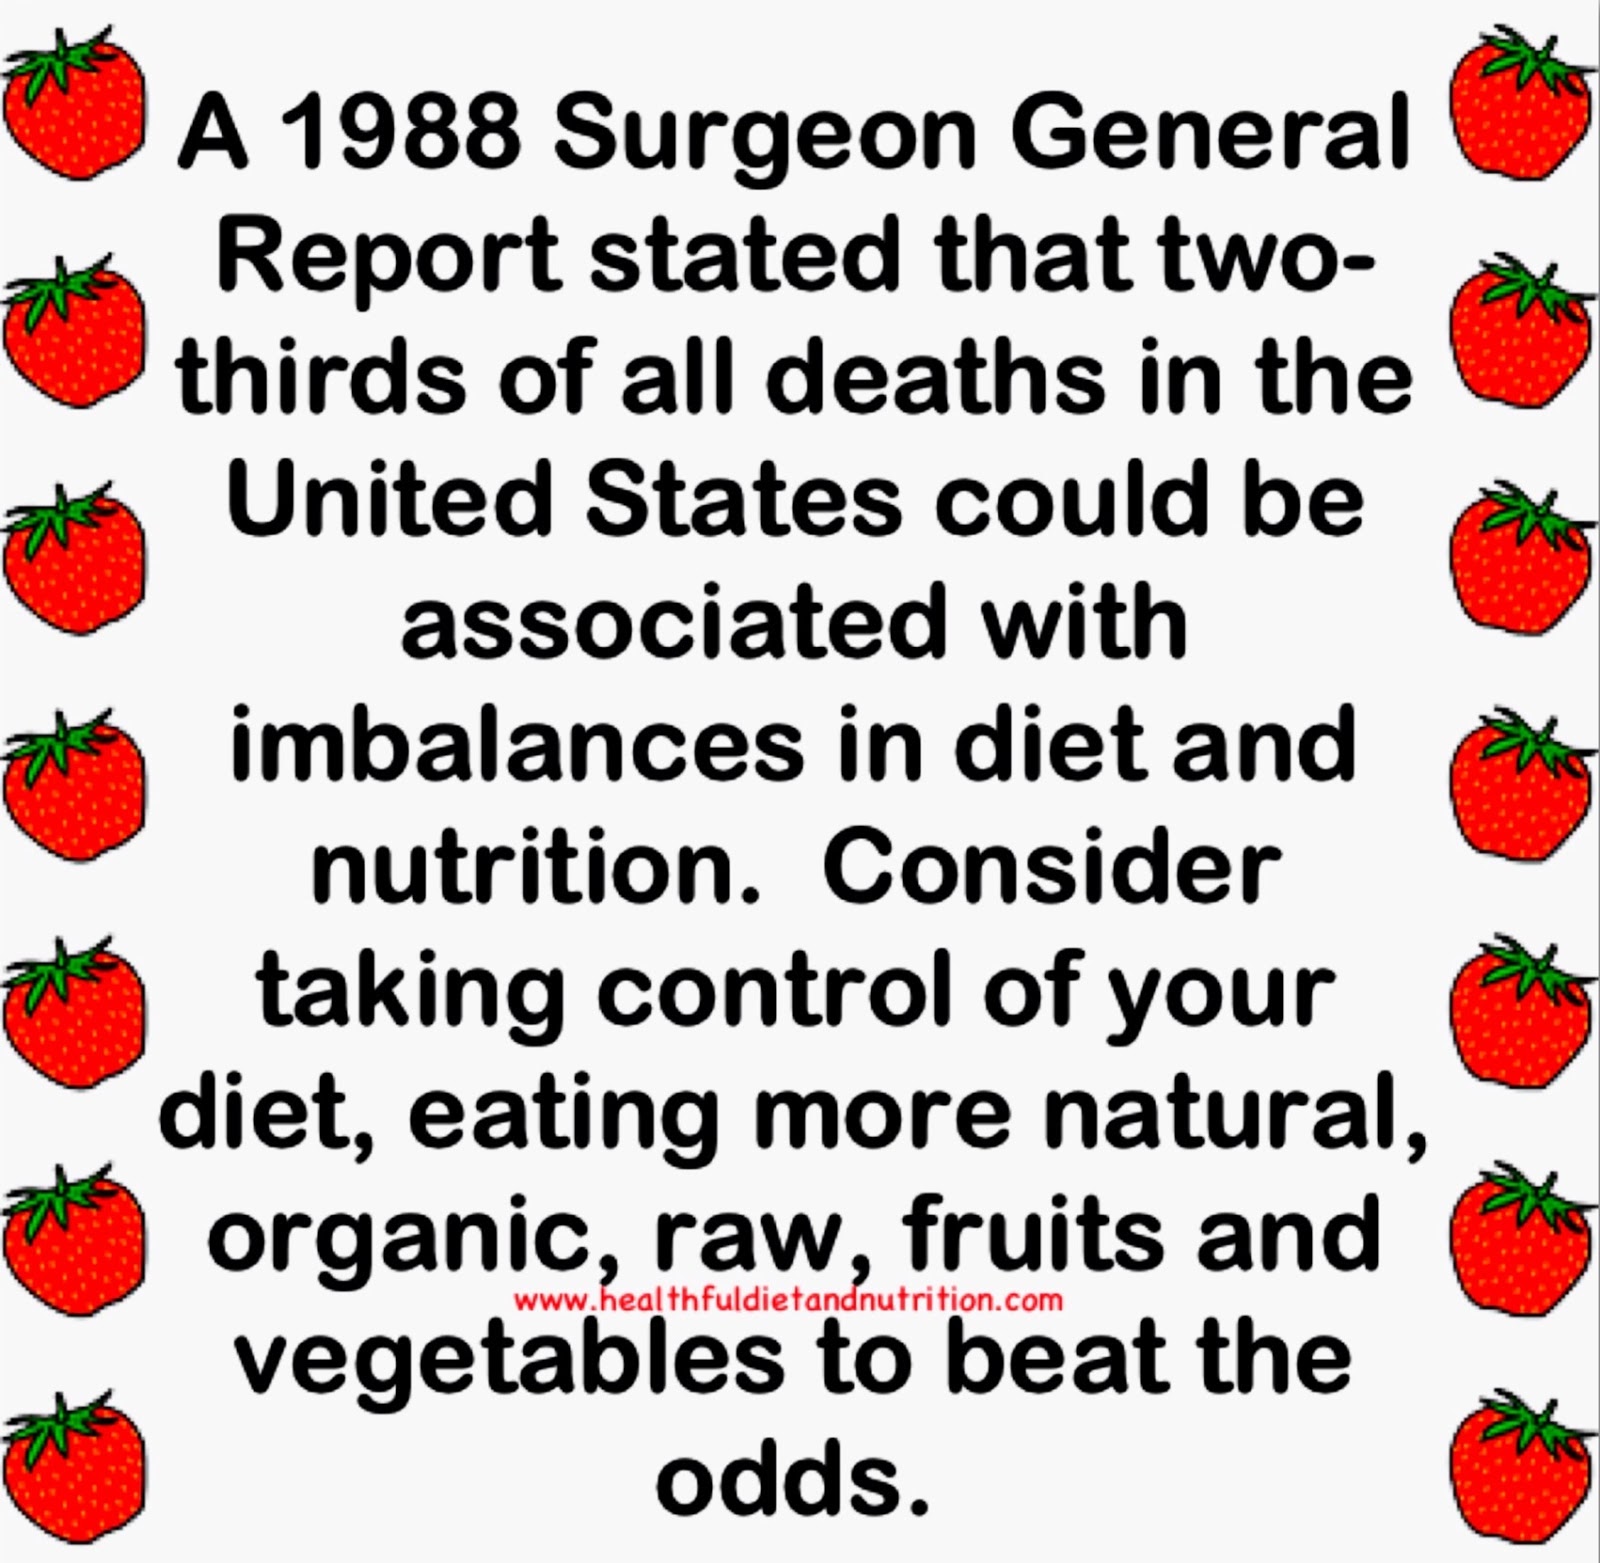 Take Control of Your Diet